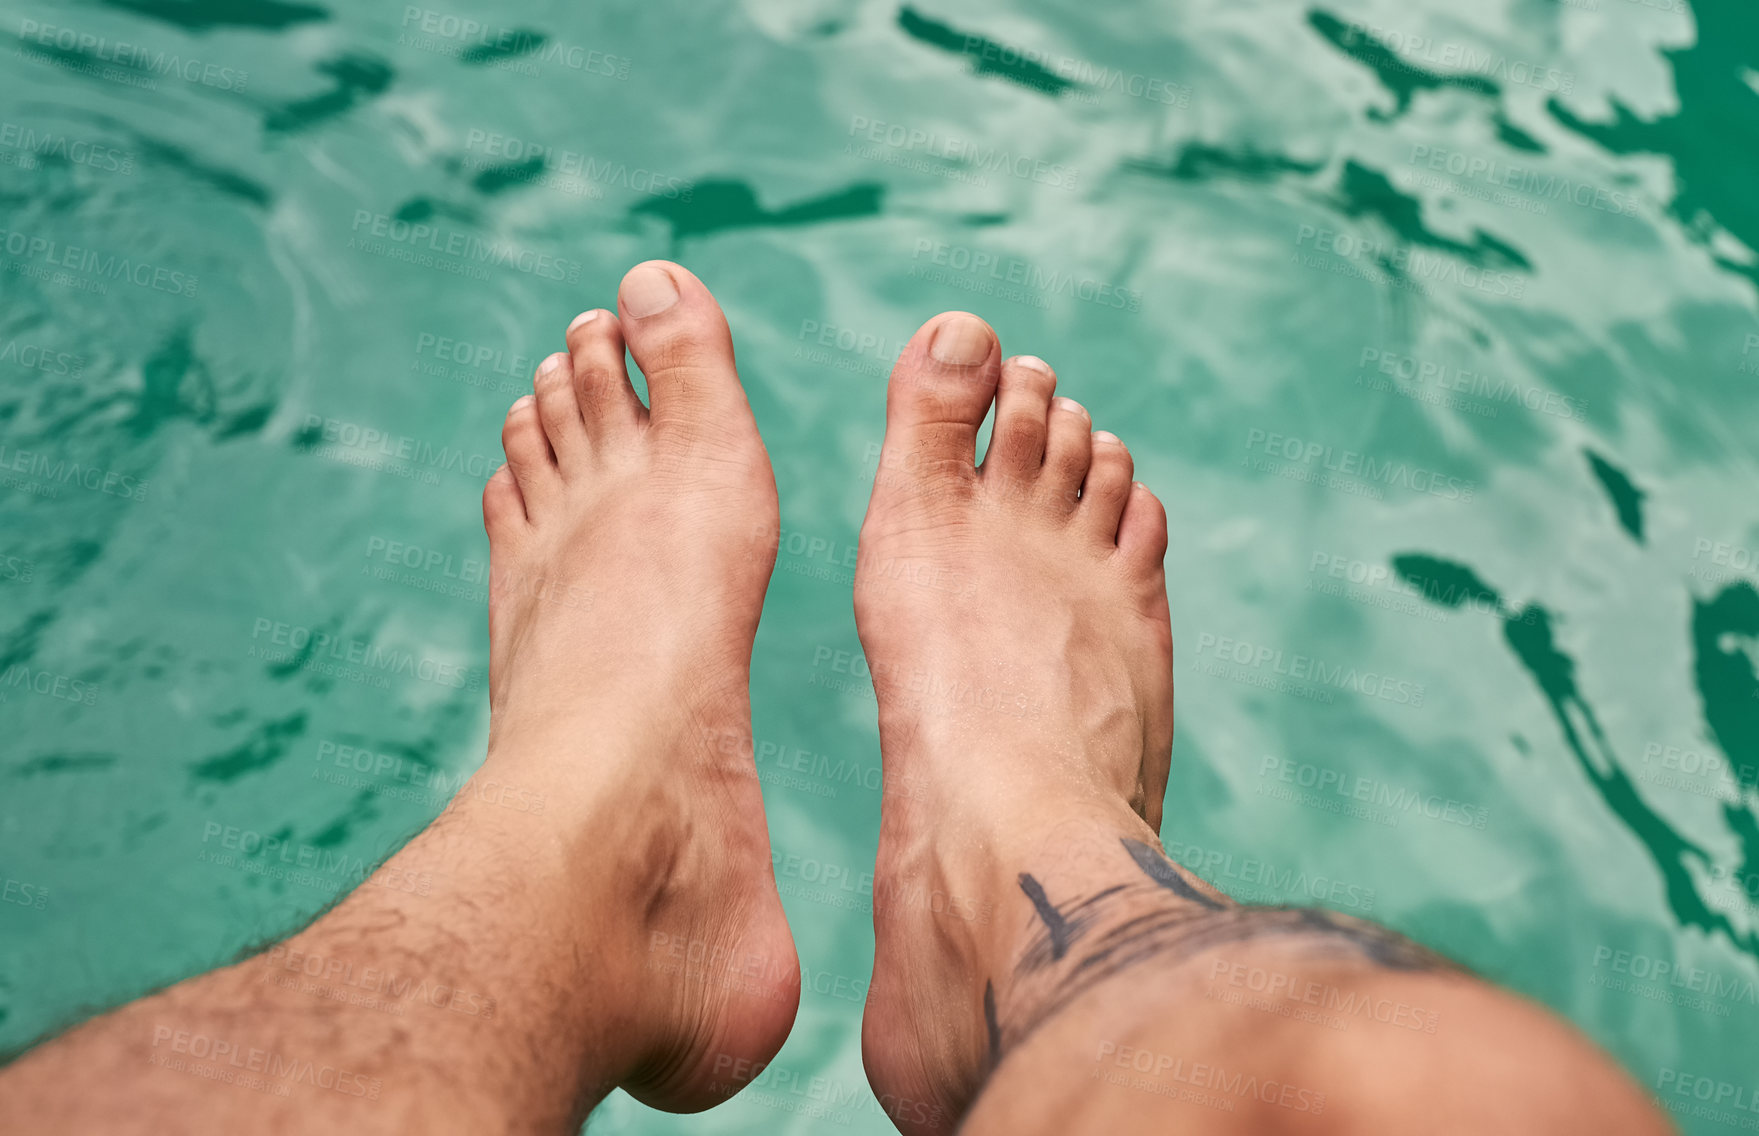 Buy stock photo High angle shot of a man's feet above the water